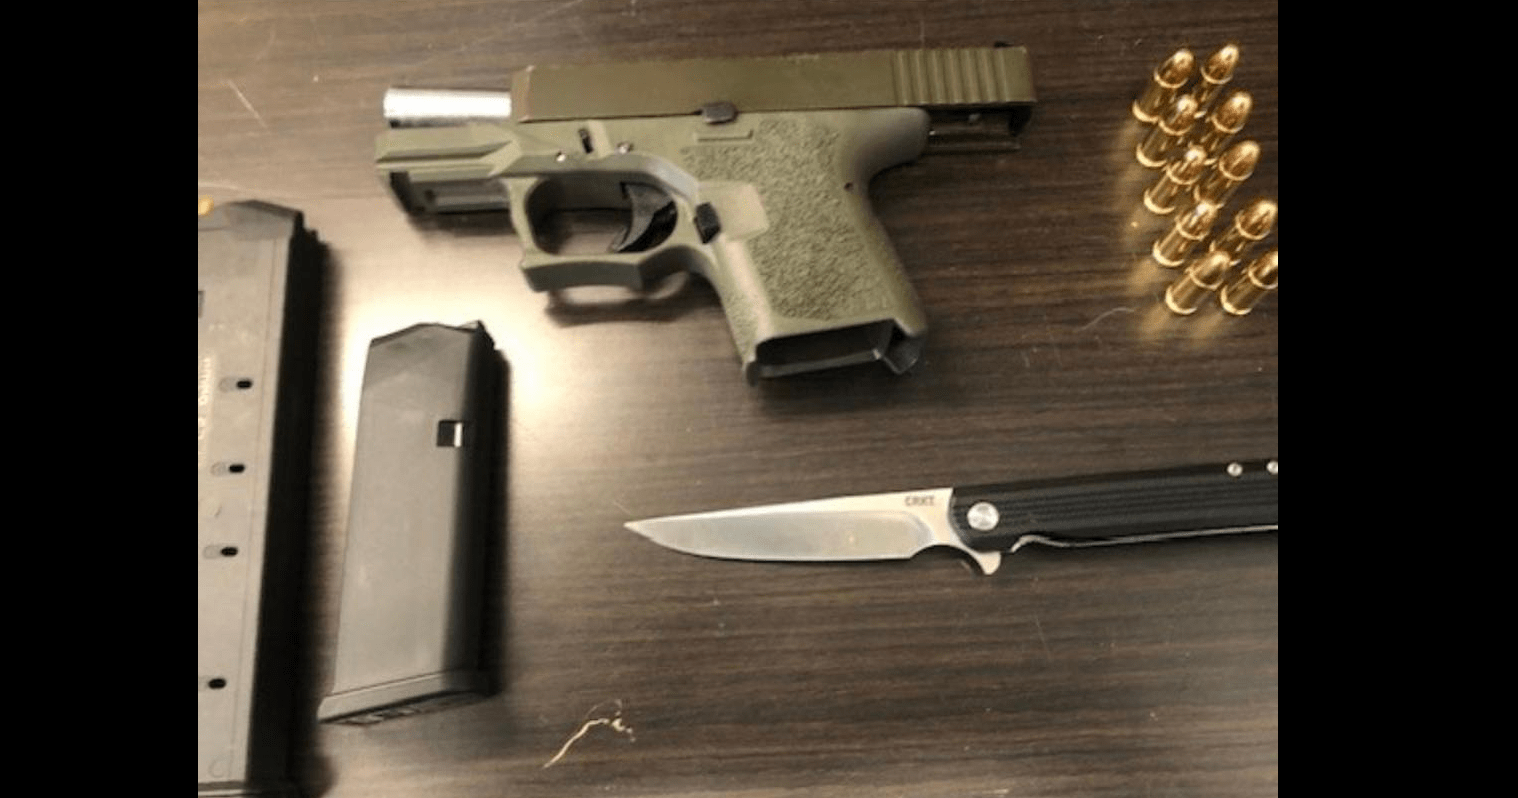 weapons-confiscated-from-windsor-high-school-4-9-24-windsor-police